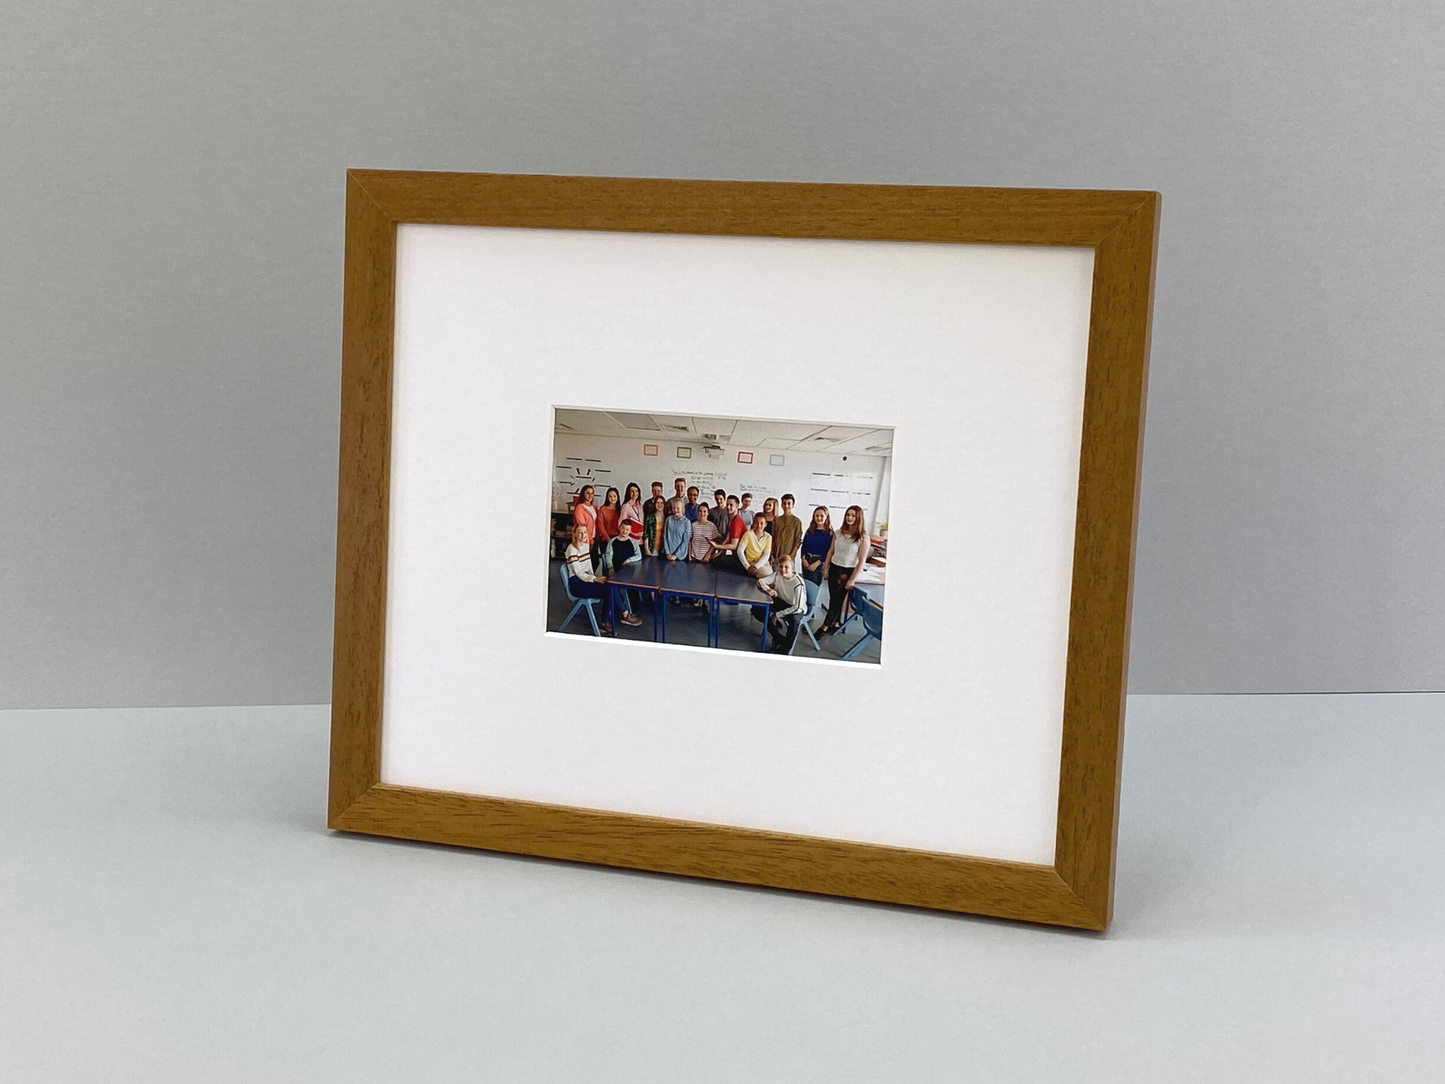 Signing Frames. Your photo with plenty of space for signatures. The perfect leaving gift, thank you gift, teacher gift.